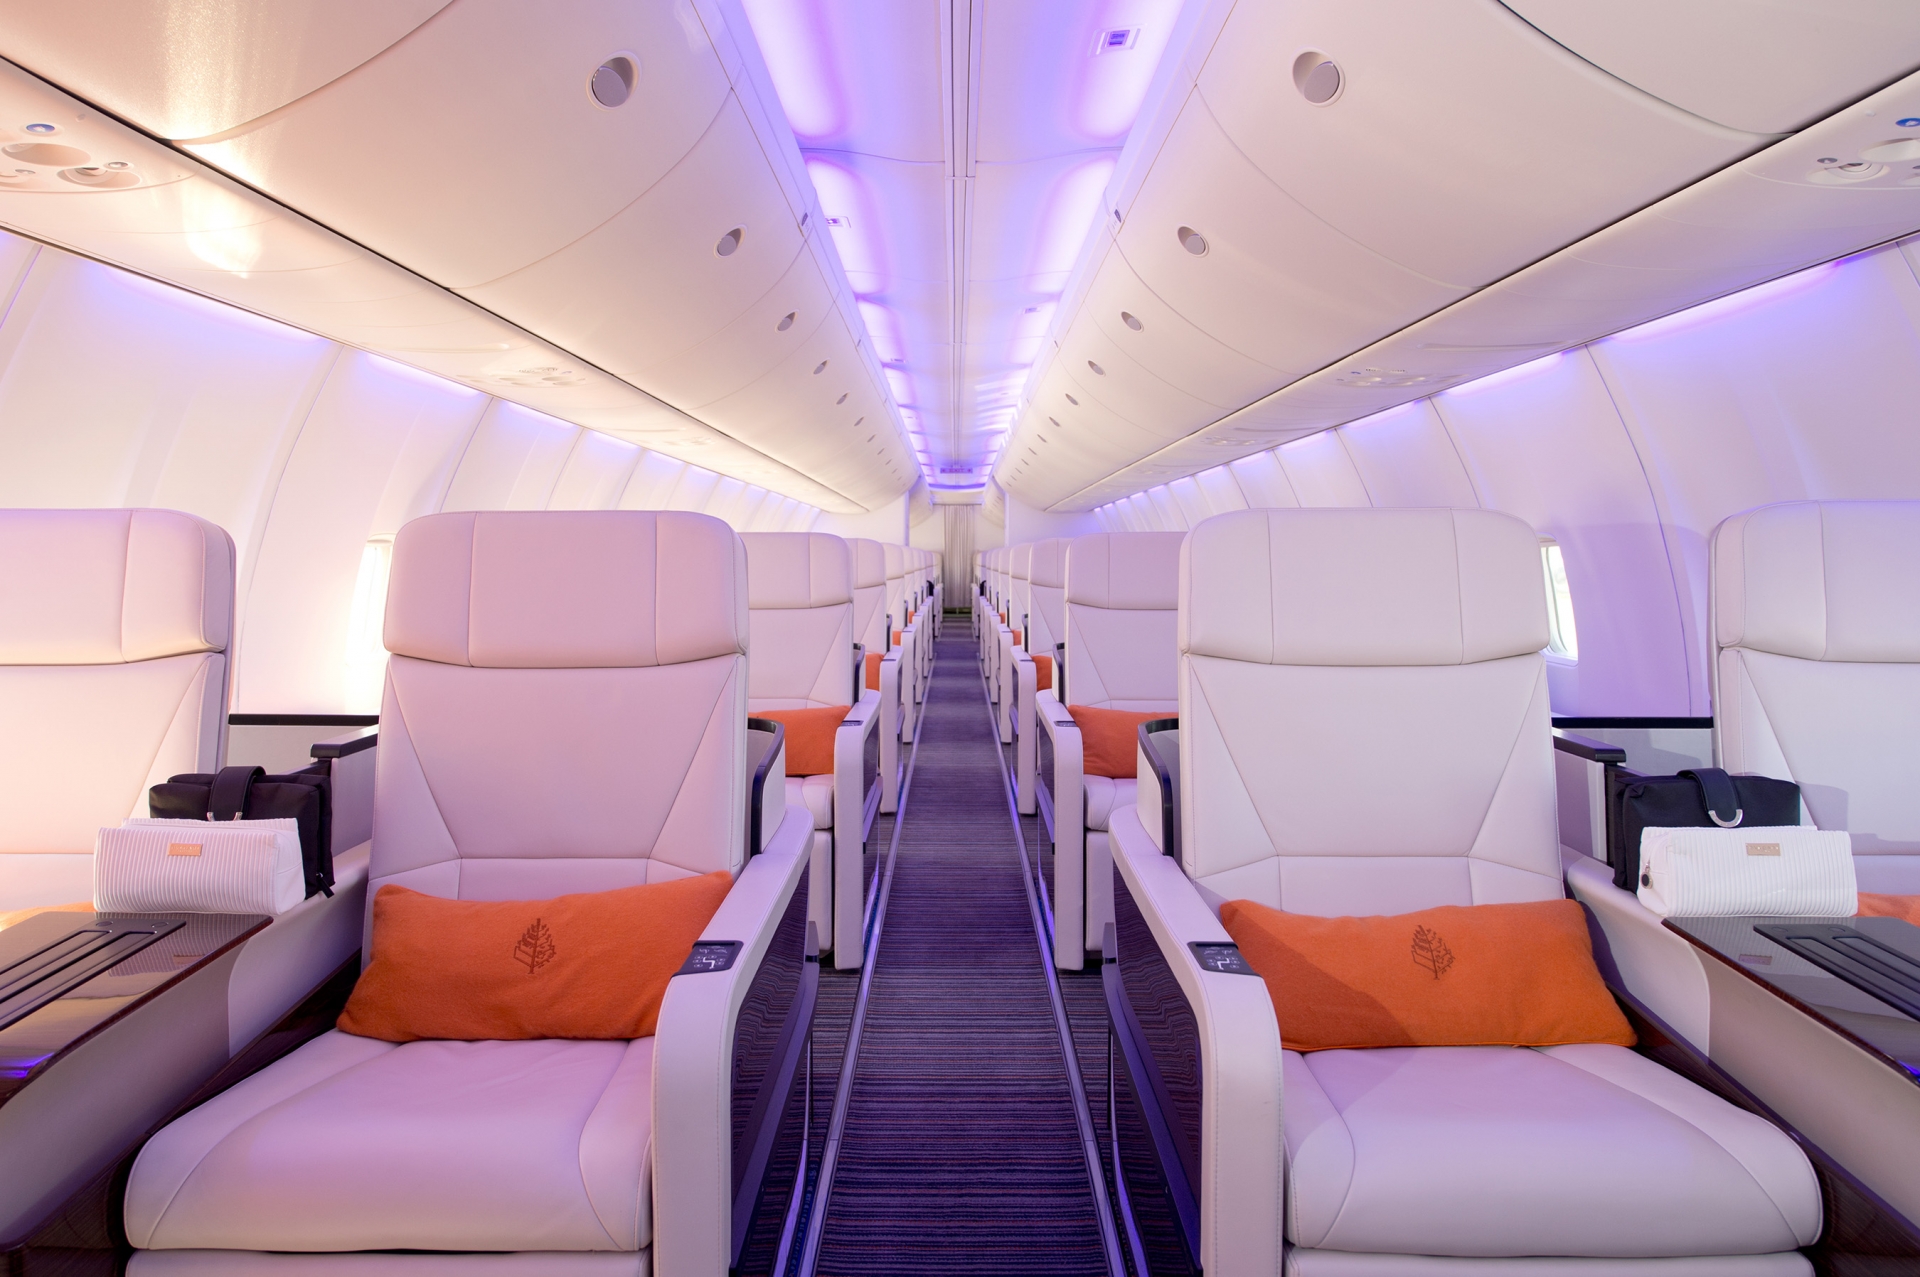 The Four Seasons Jet is a Boeing 757, fully customized with 52 seats